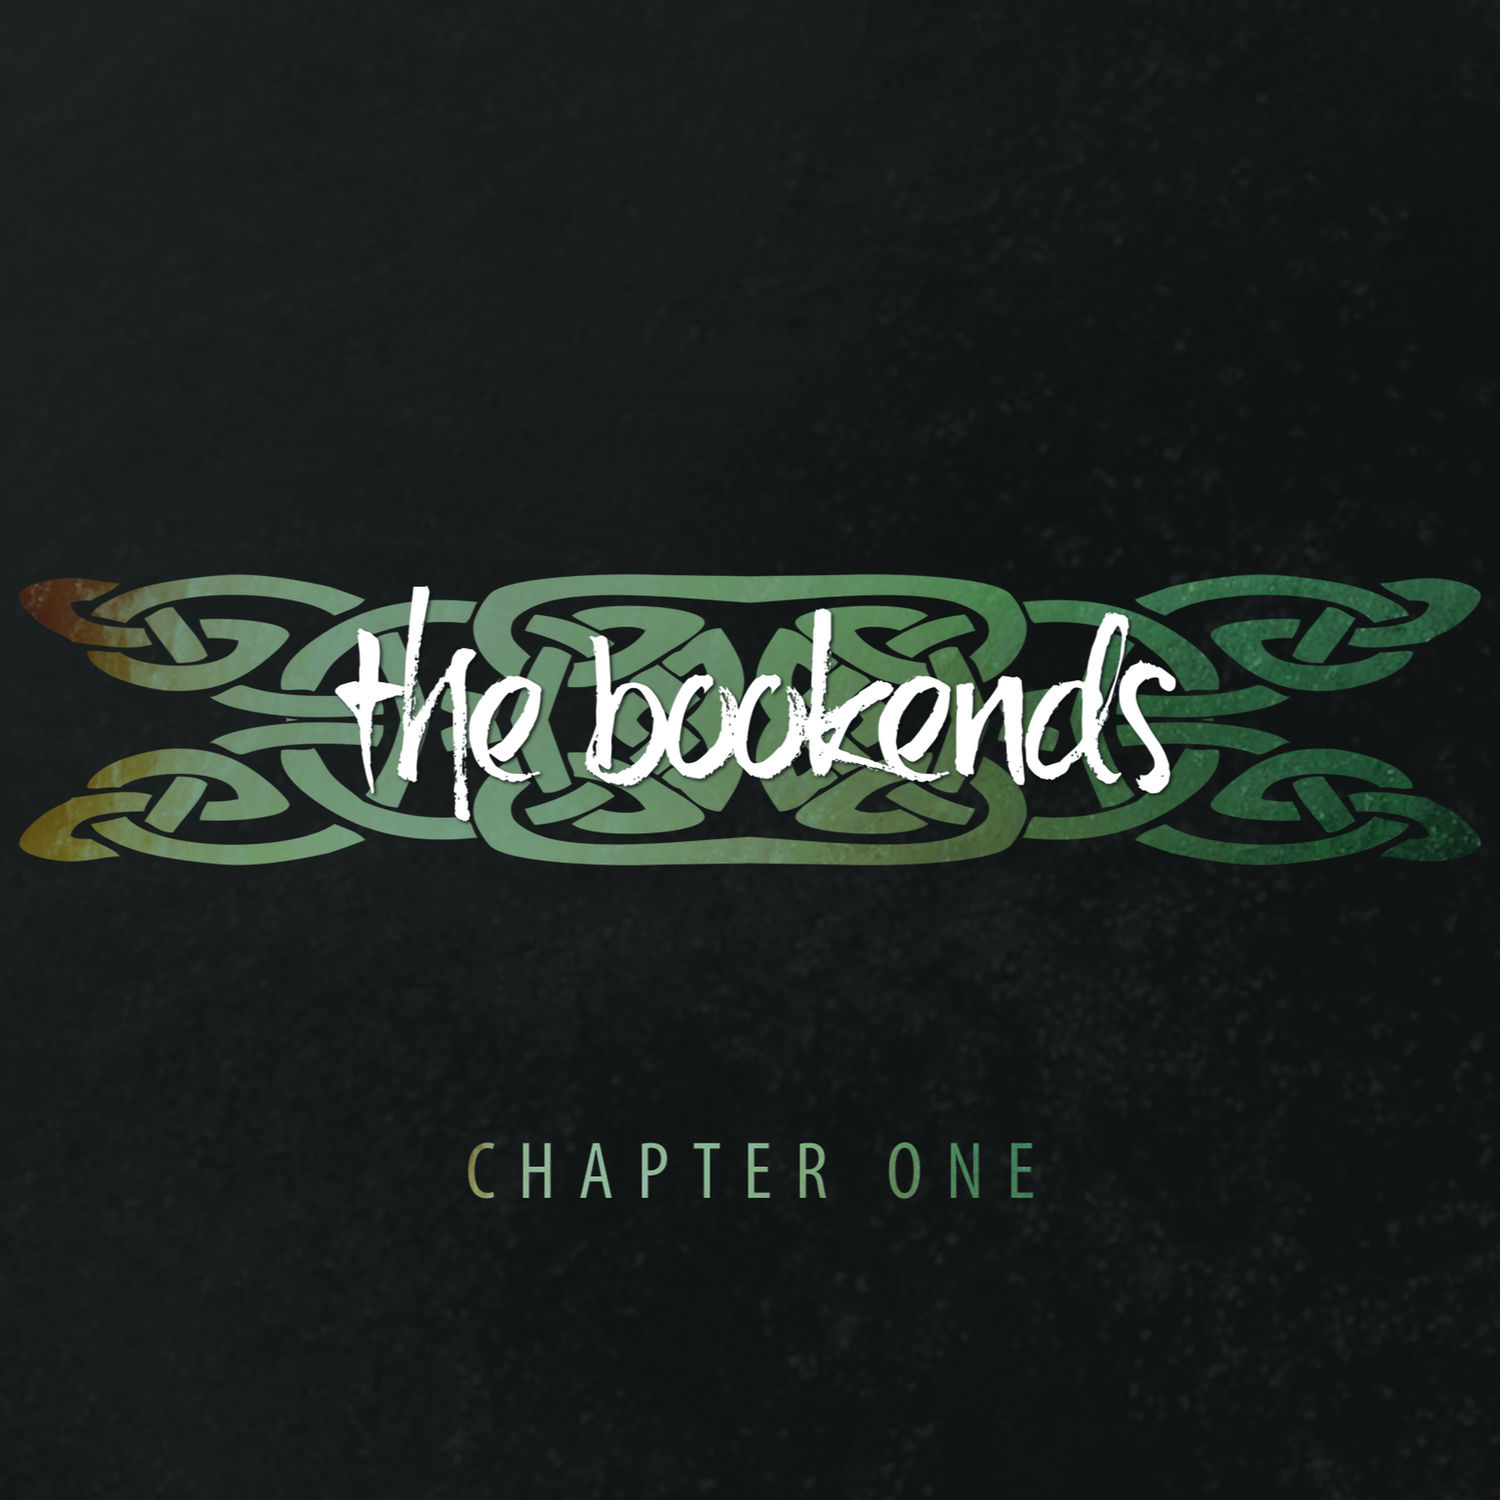 The Bookends – Chapter One (2020) [FLAC 24bit/48kHz]